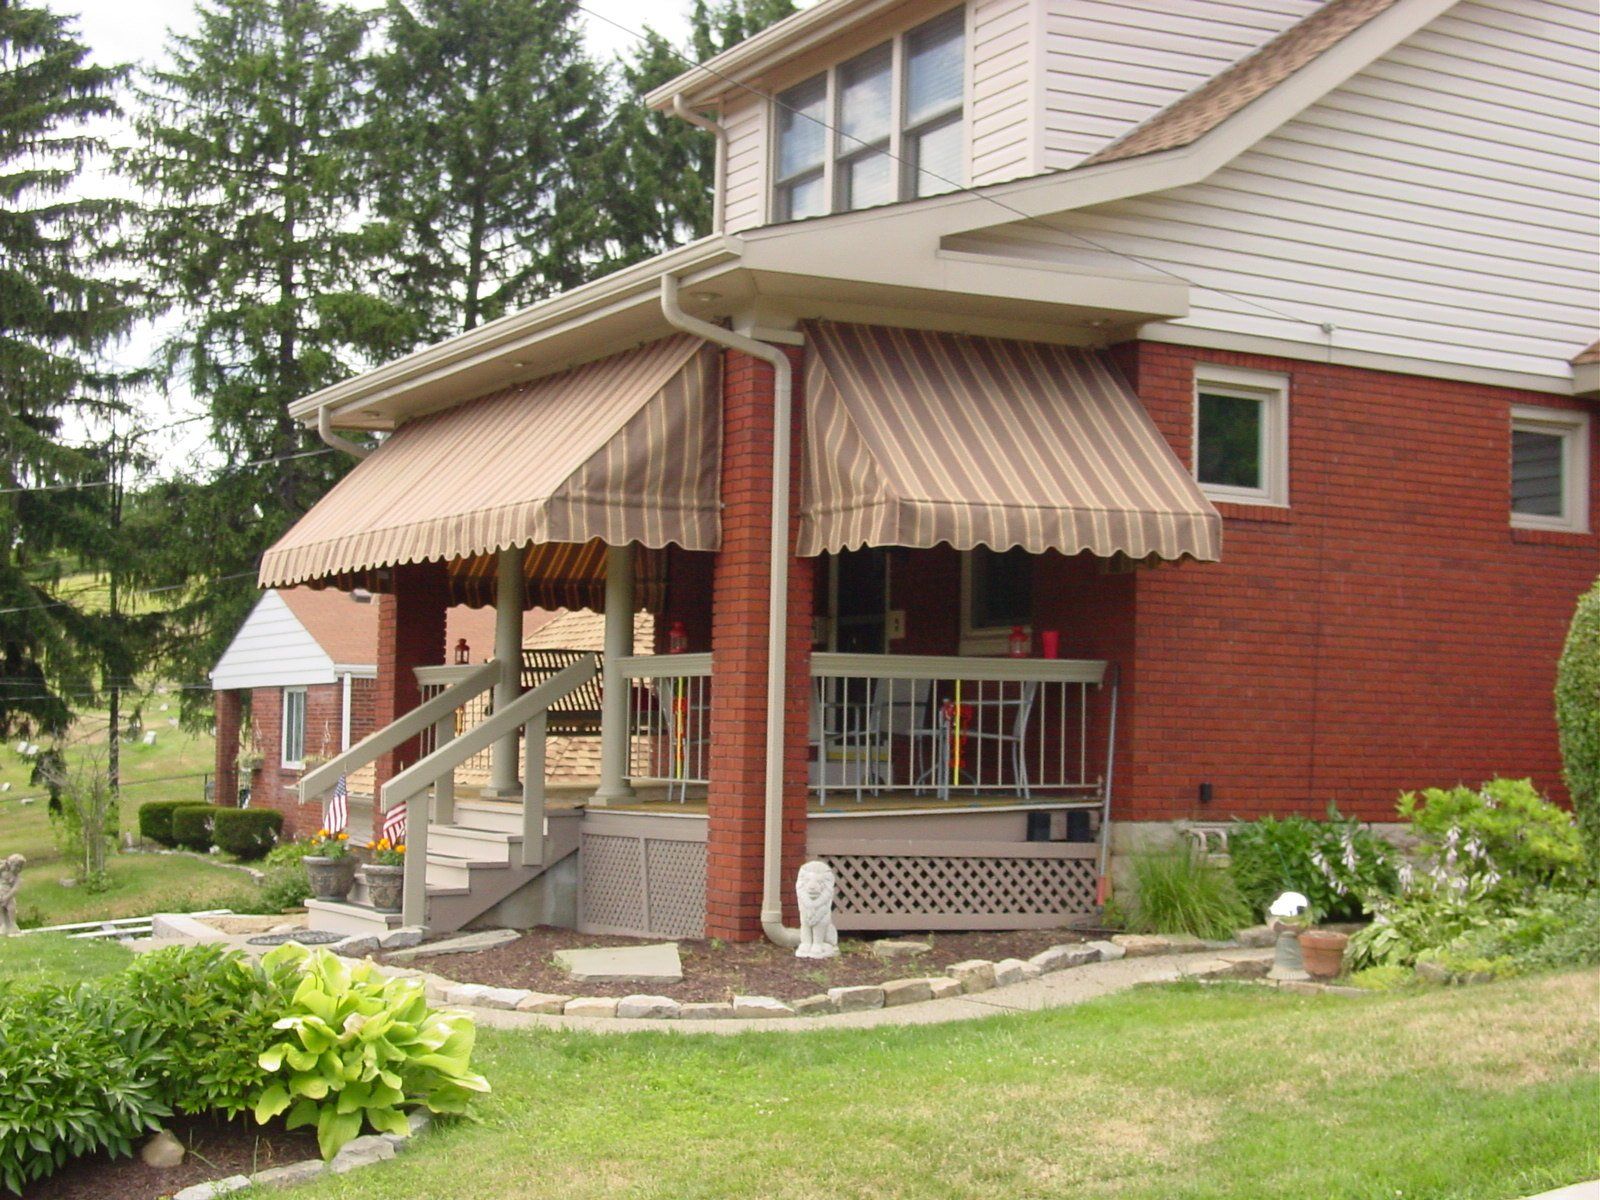 Residential awning-13 — Custom awnings in Pittsburgh, PA